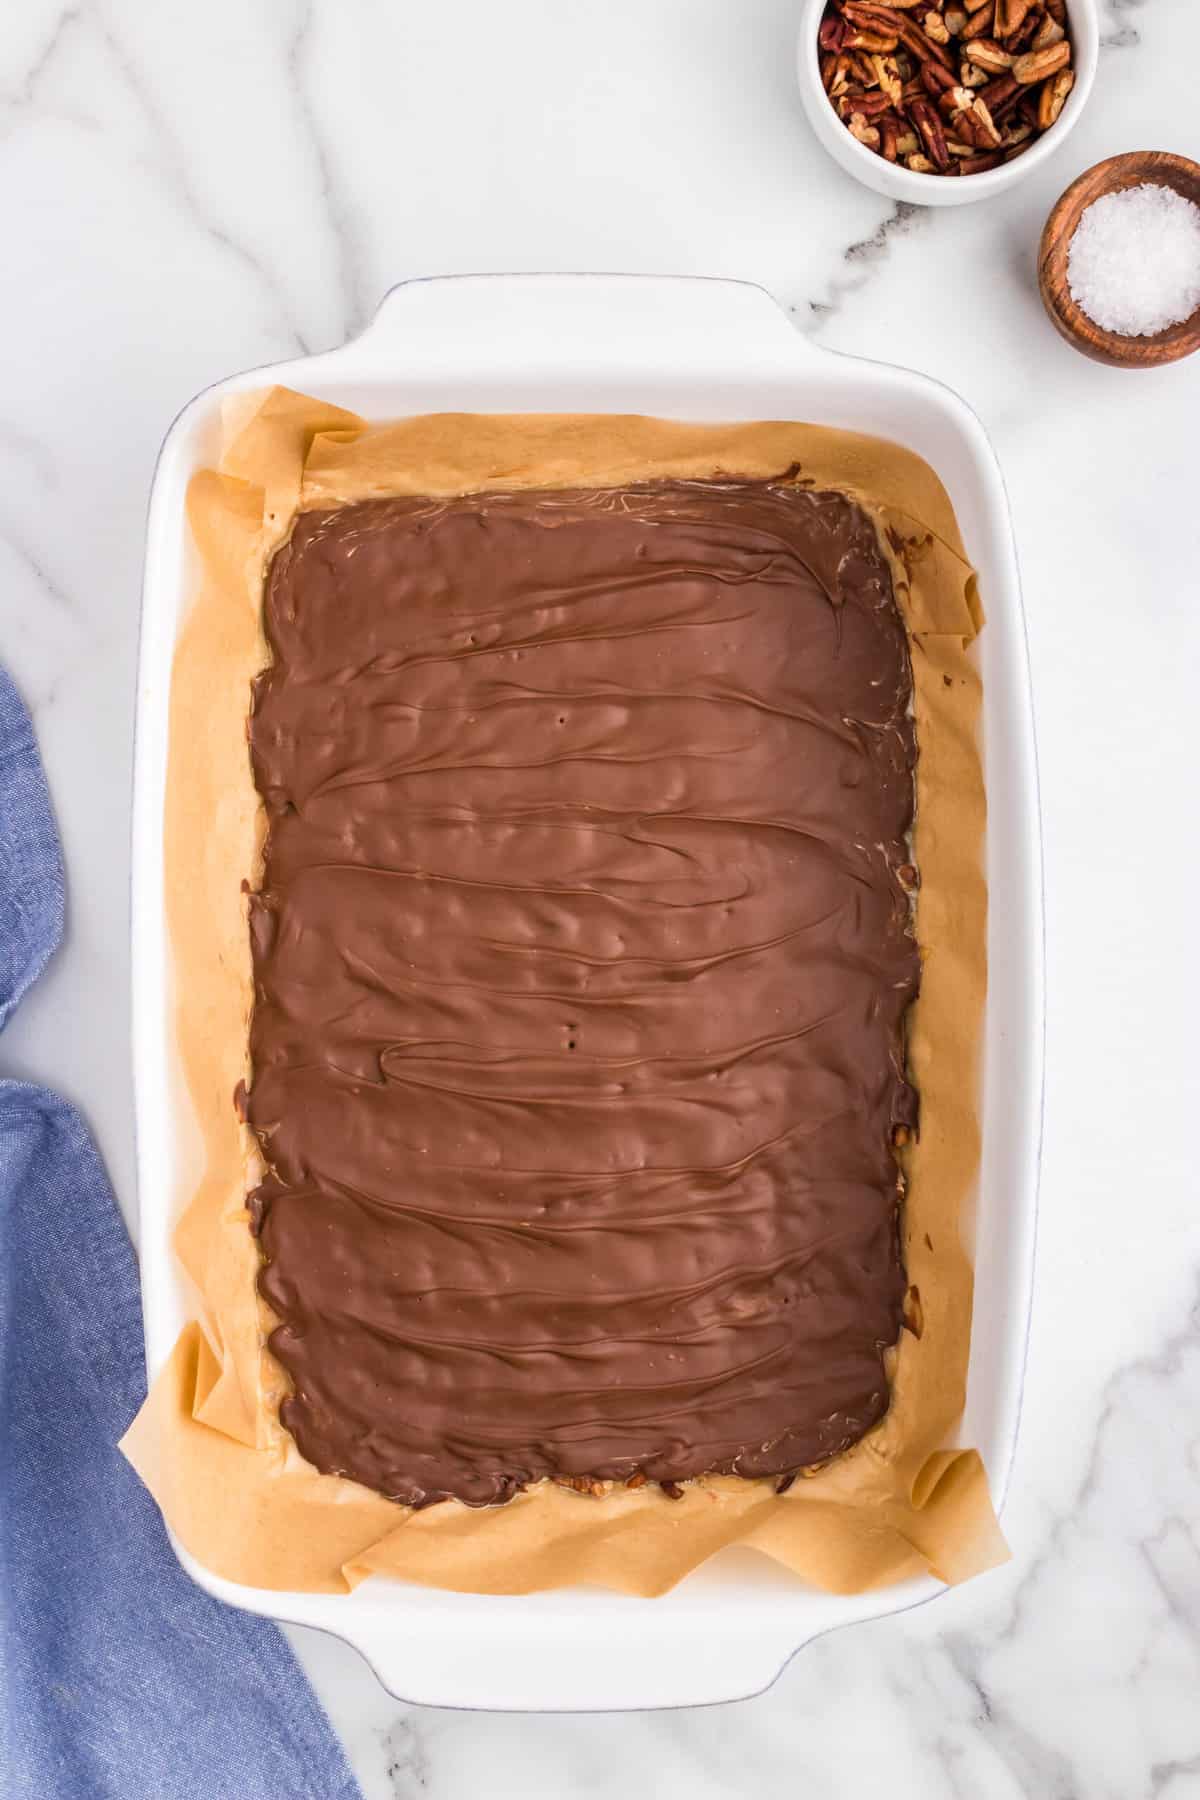 Allowing Toffee to set up in baking dish